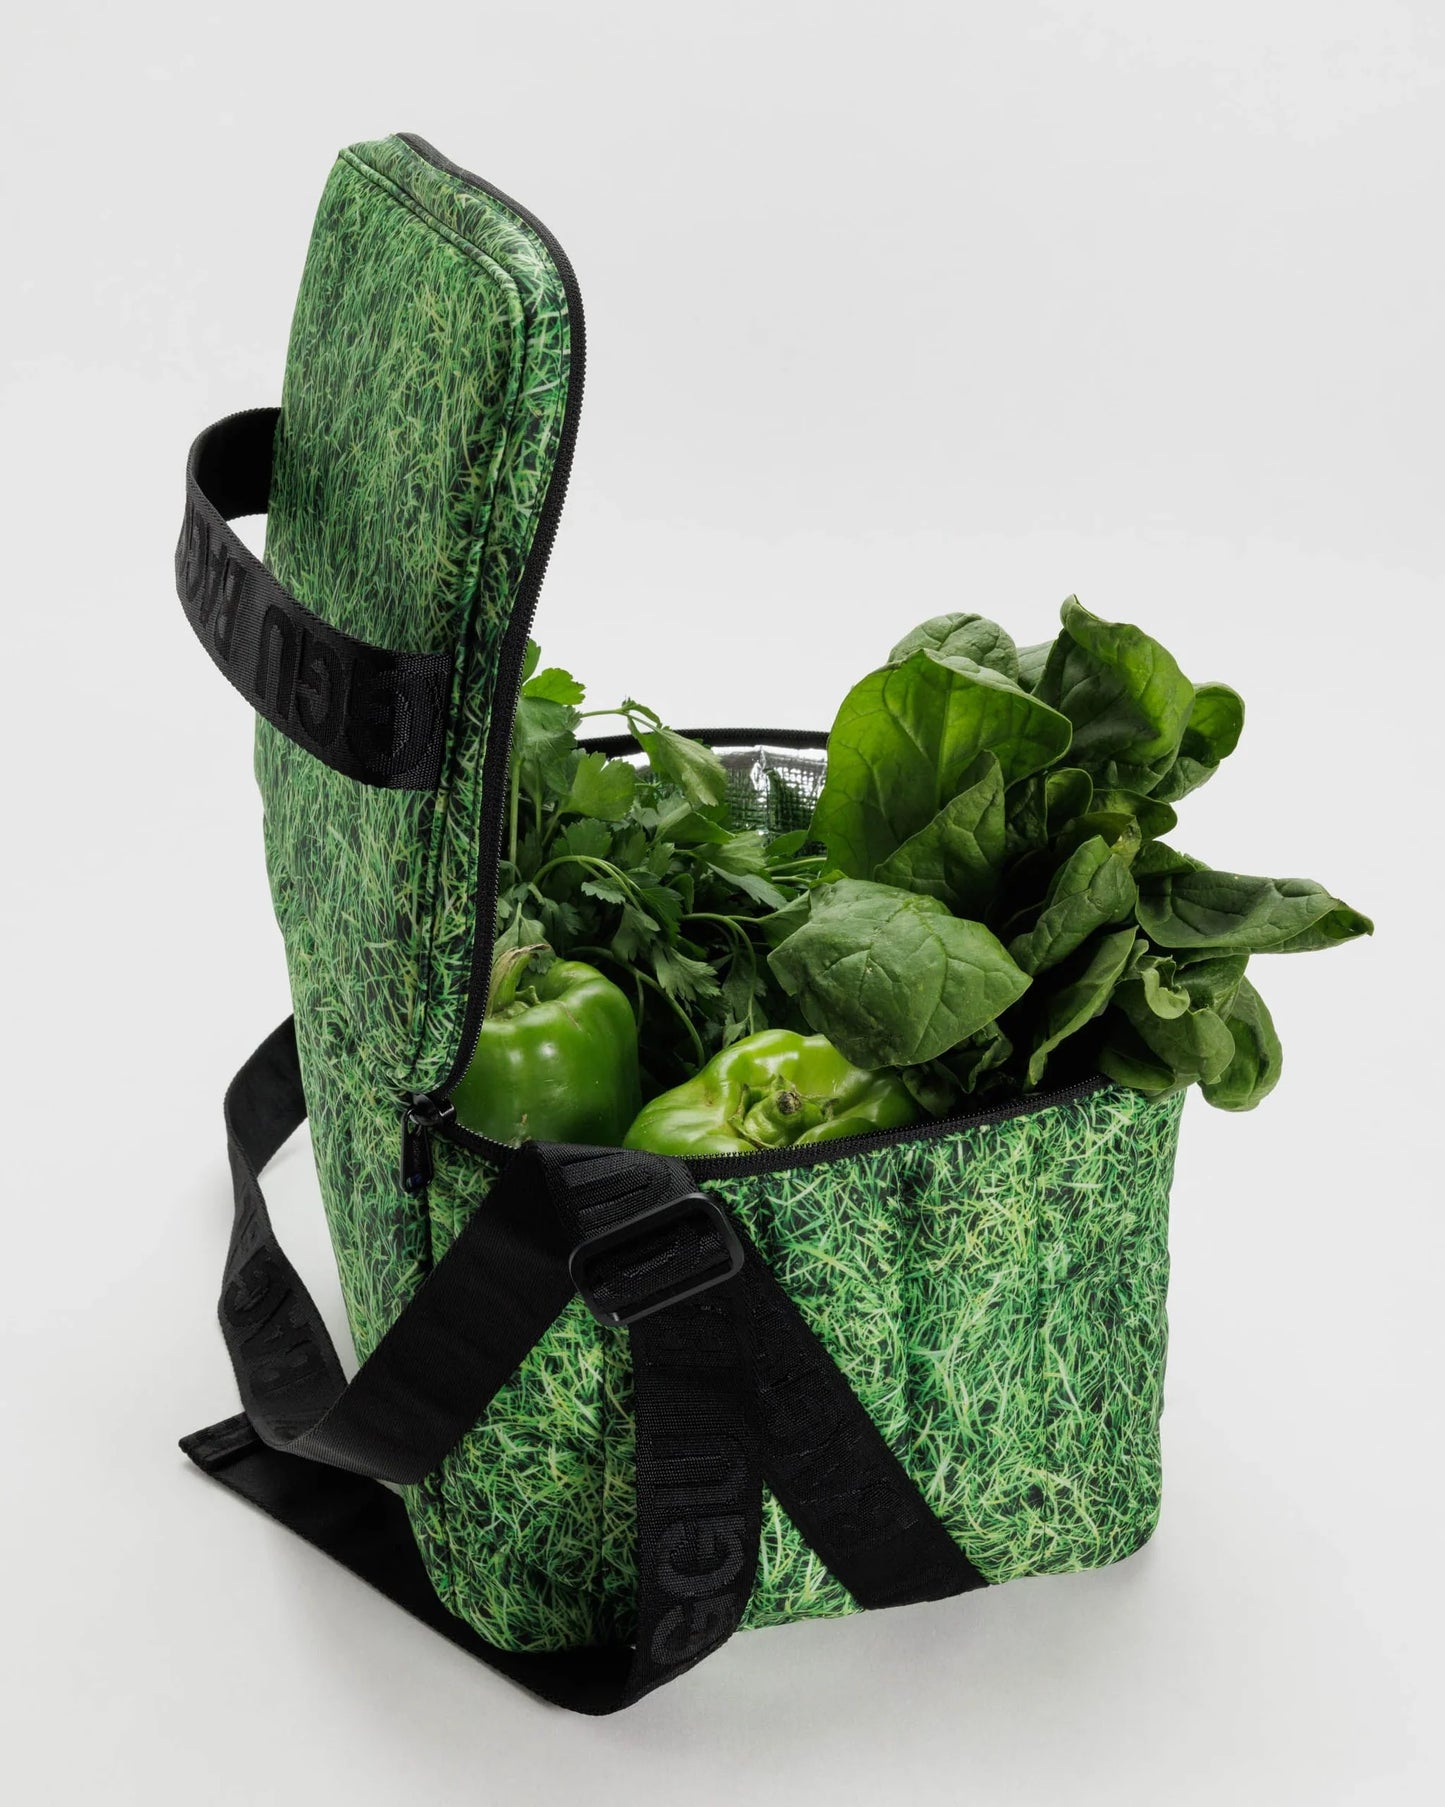 Grass Pattern Puffy Insulated Cooler Bag with Black Strap with De-bossed "BAGGU" Text